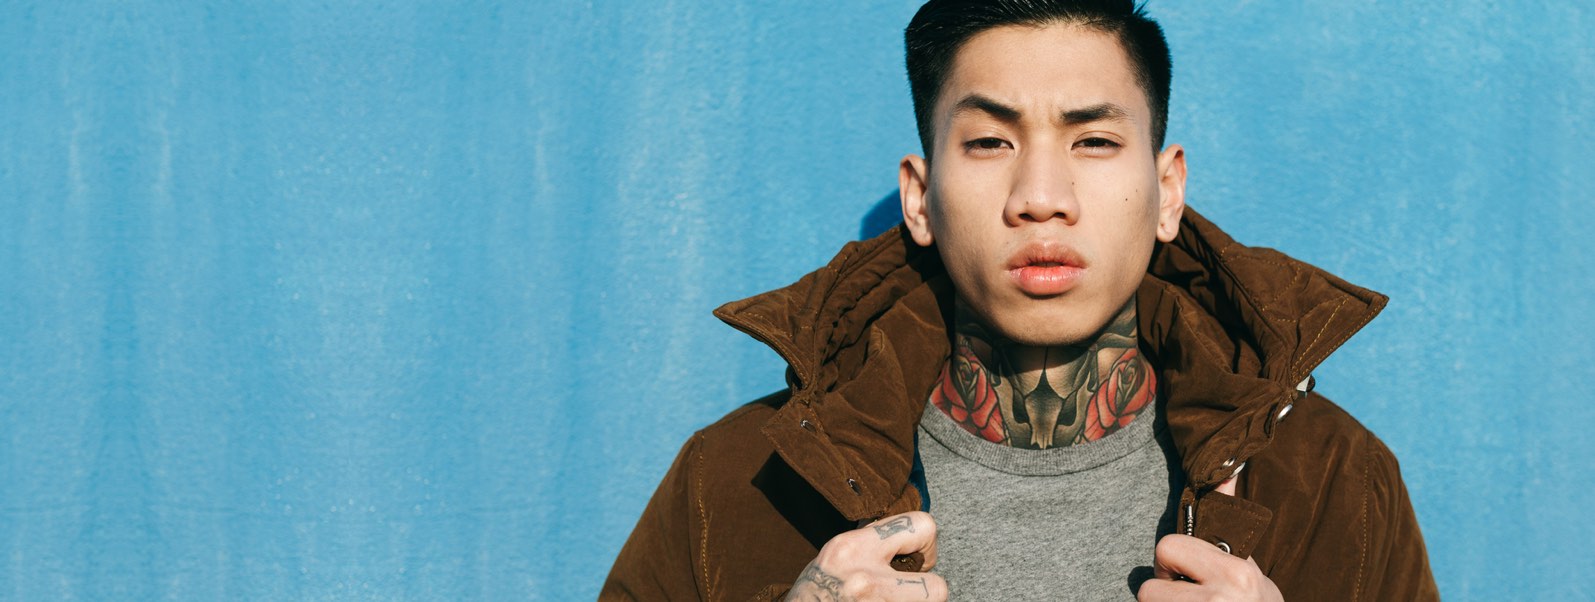 An asian man wearing a brown coat stands in front of a blue wall with tattoos on his hand and neck.